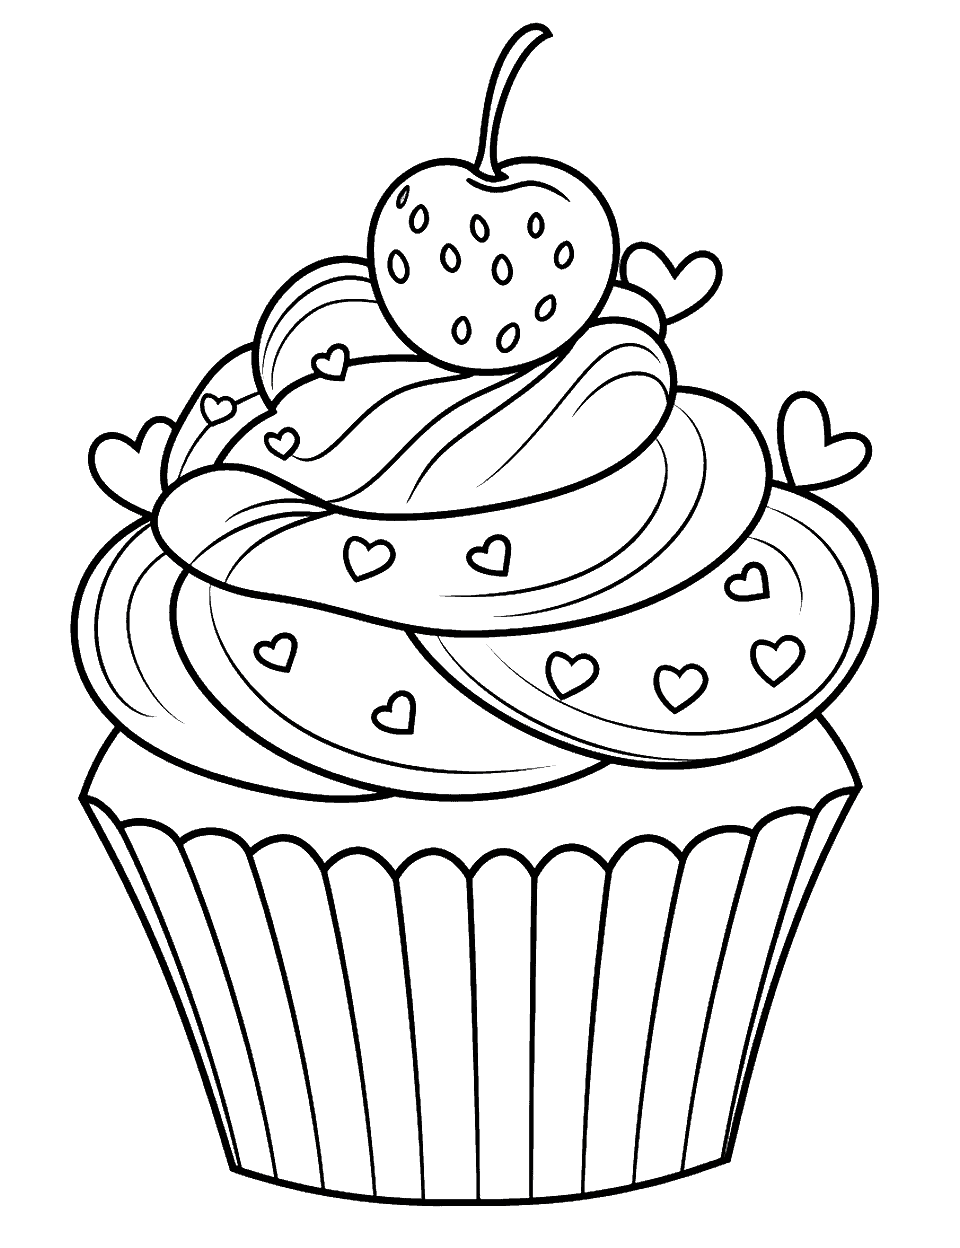 Valentine's Day Cupcake Coloring Page - A heart-shaped cupcake with red and pink frosting in celebration of Valentine’s Day.